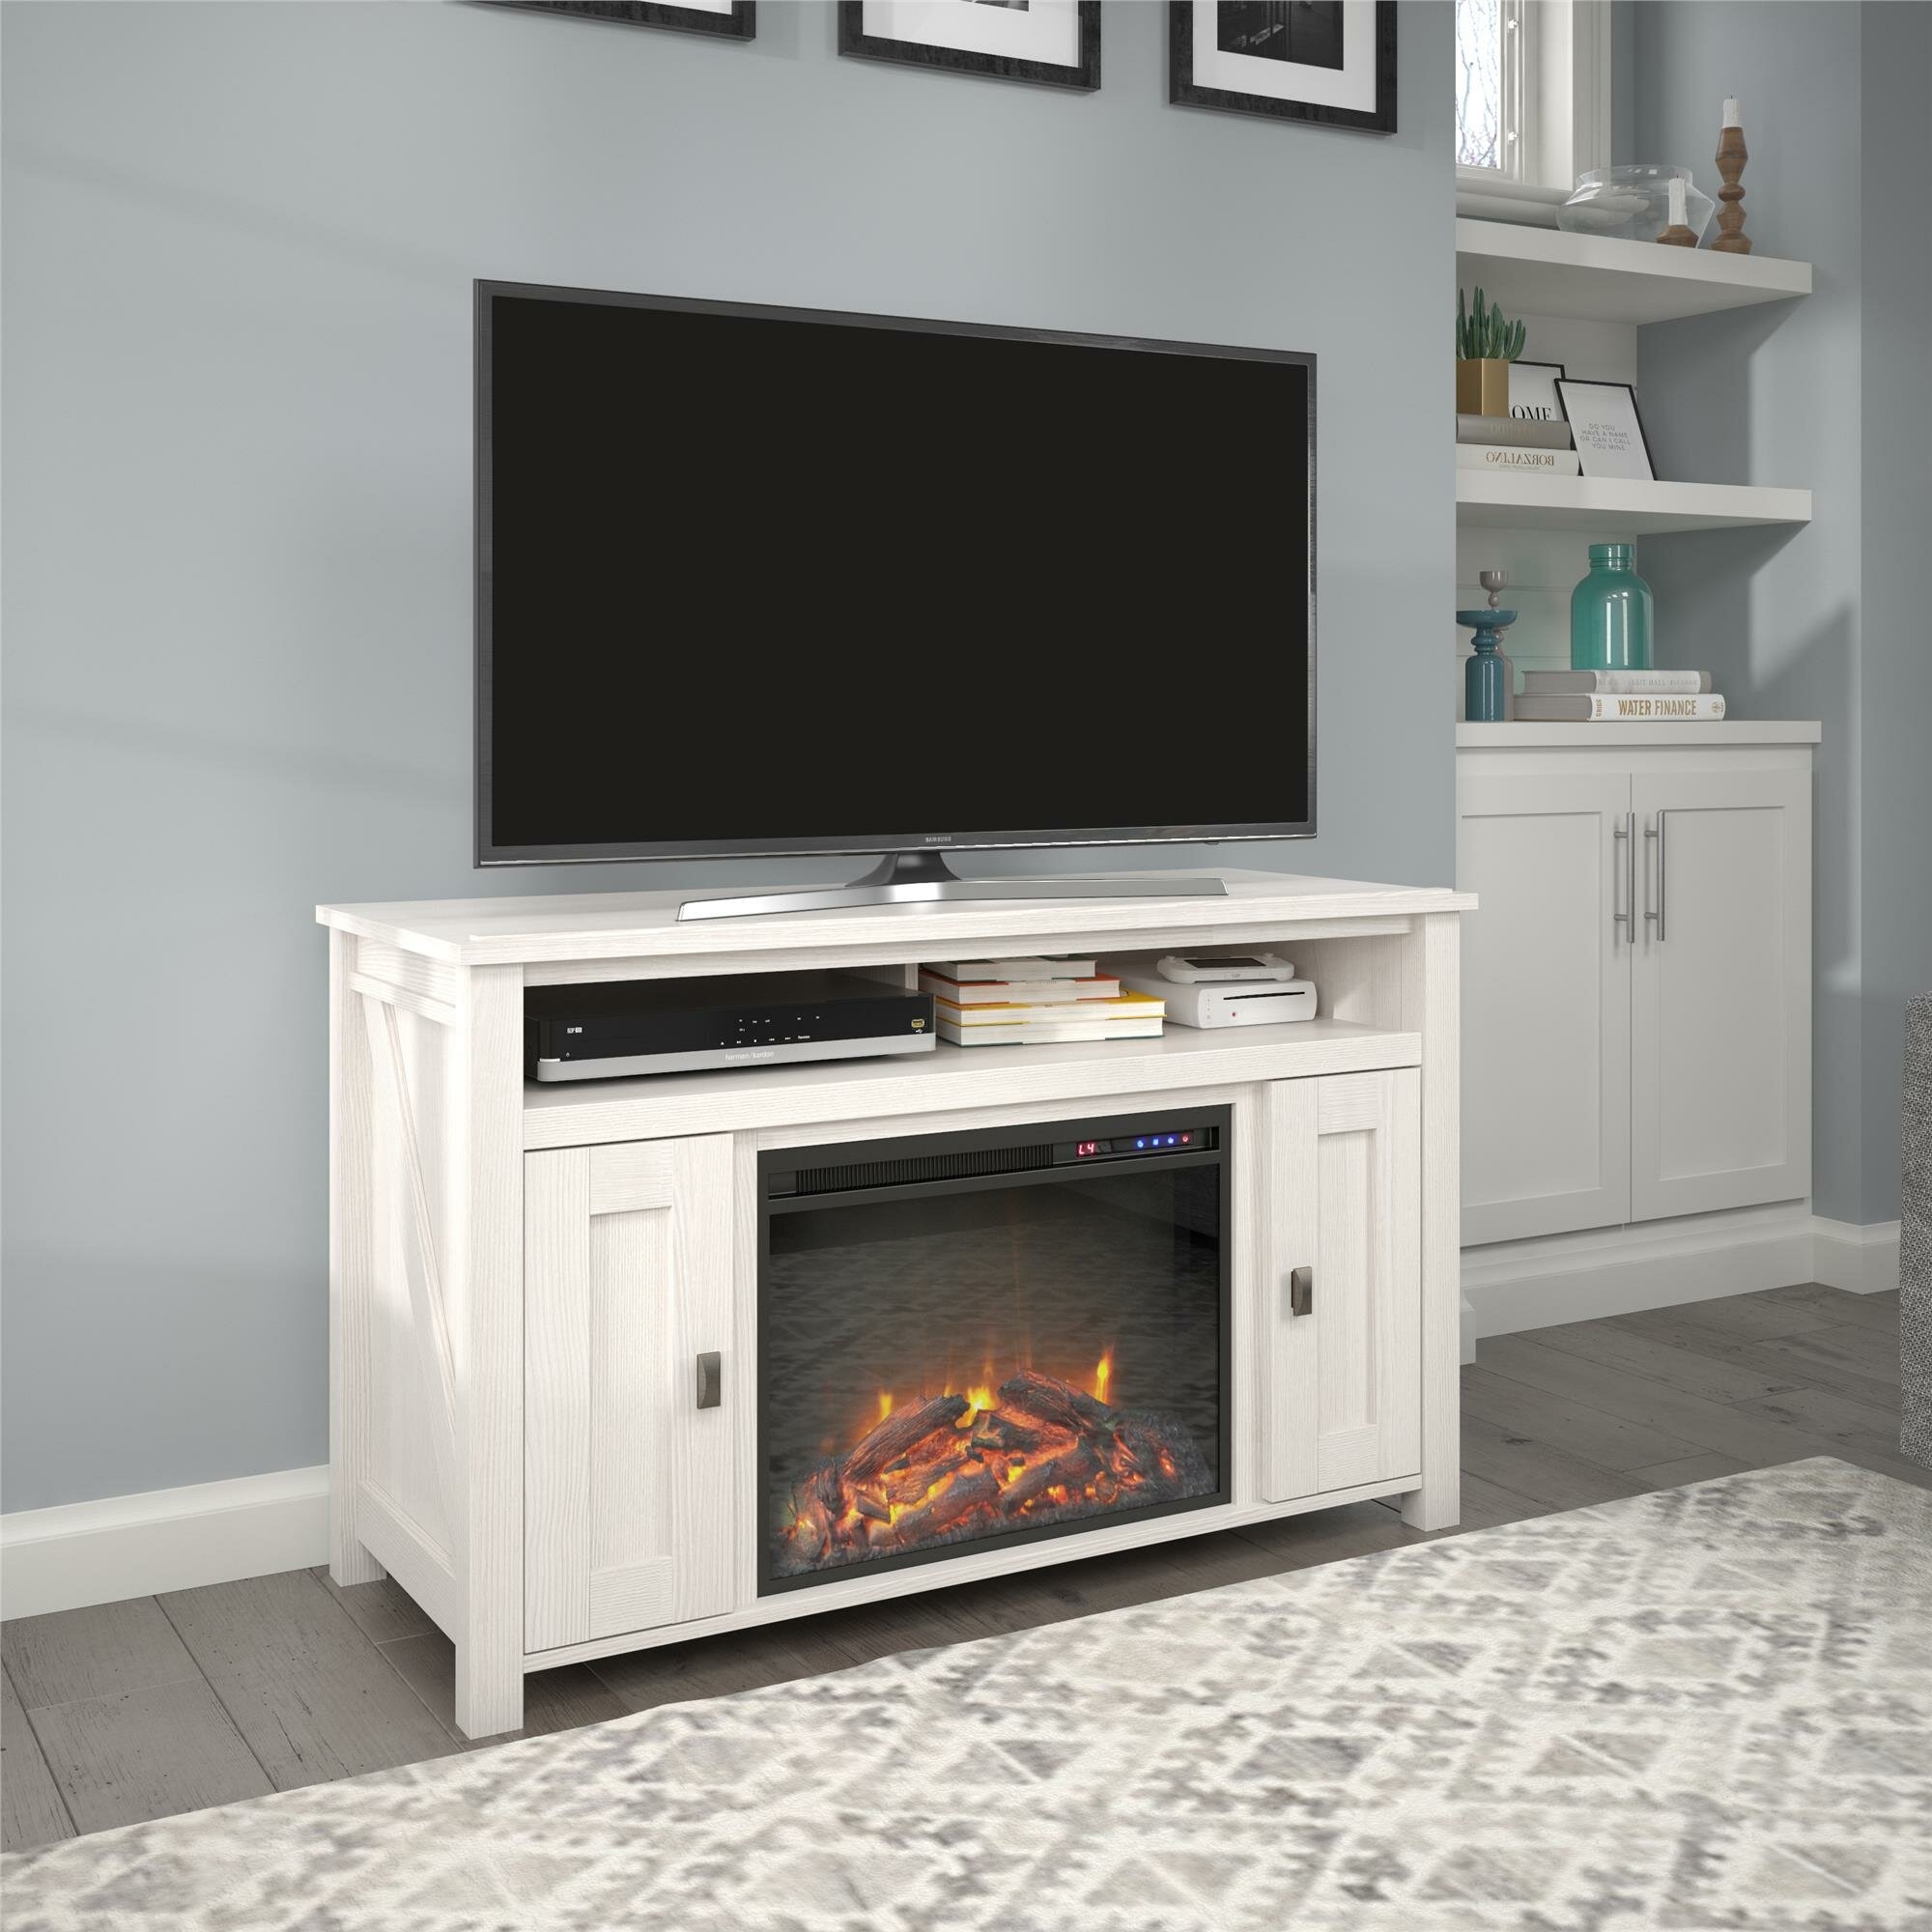 Whittier TV Stand for TVs up to 50" with Electric Fireplace Included